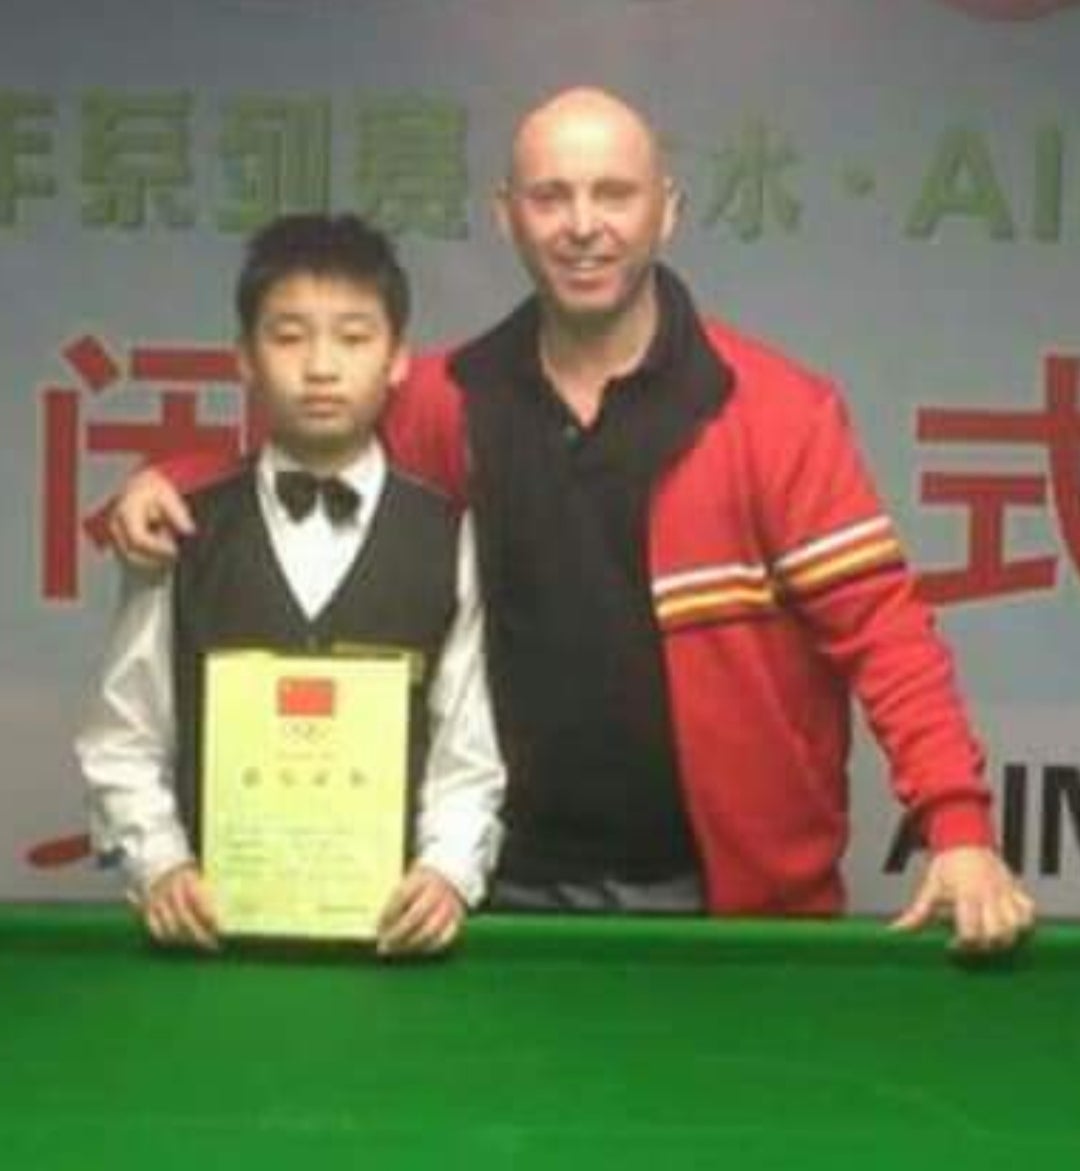 Si Jiahui How bad-tempered child prodigy became snookers serene sensation The Independent